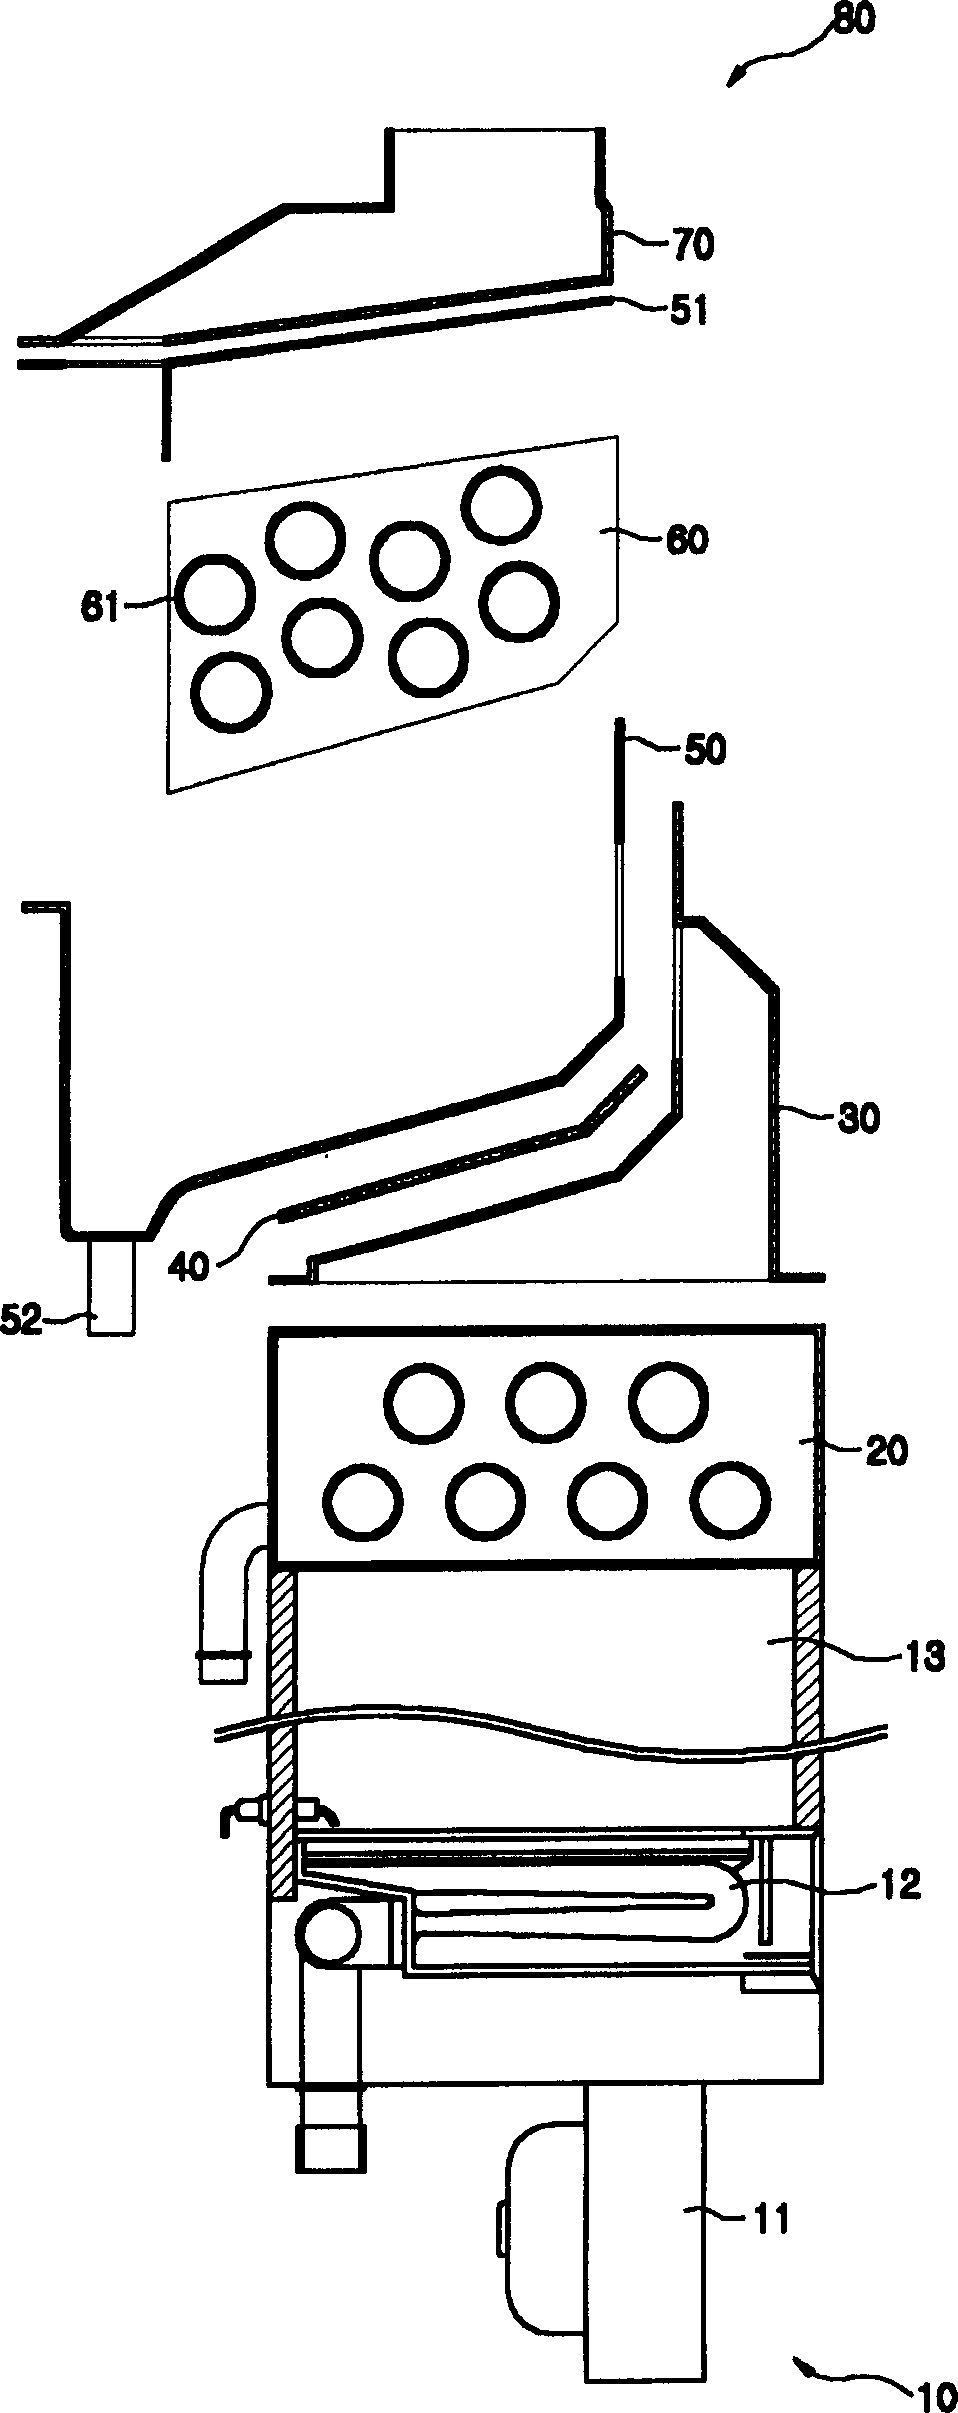 Latent heat absorbing apparatus for gas boiler